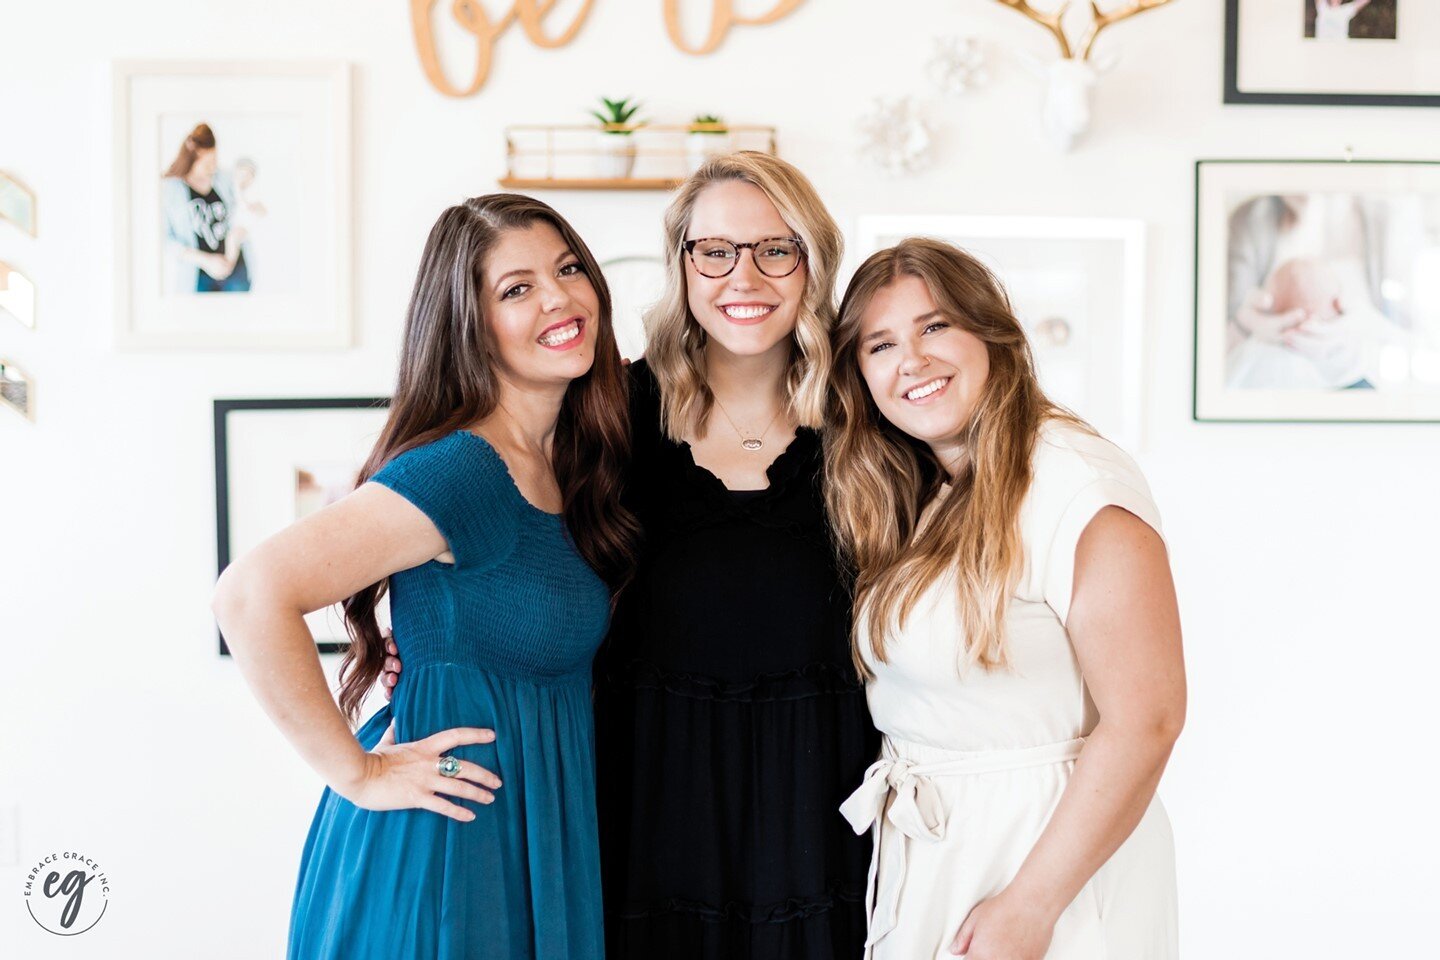 We&rsquo;ve added to the team three-fold!!! 💗🎉 Meet Mel, Sydney, and GraceAnn! ⁠
⁠
Mel is our new Marketing Director. She loves all things creative, going out for sushi, shopping at Homegoods, and tackling new adventures head on! ⁠
⁠
Sydney is our 